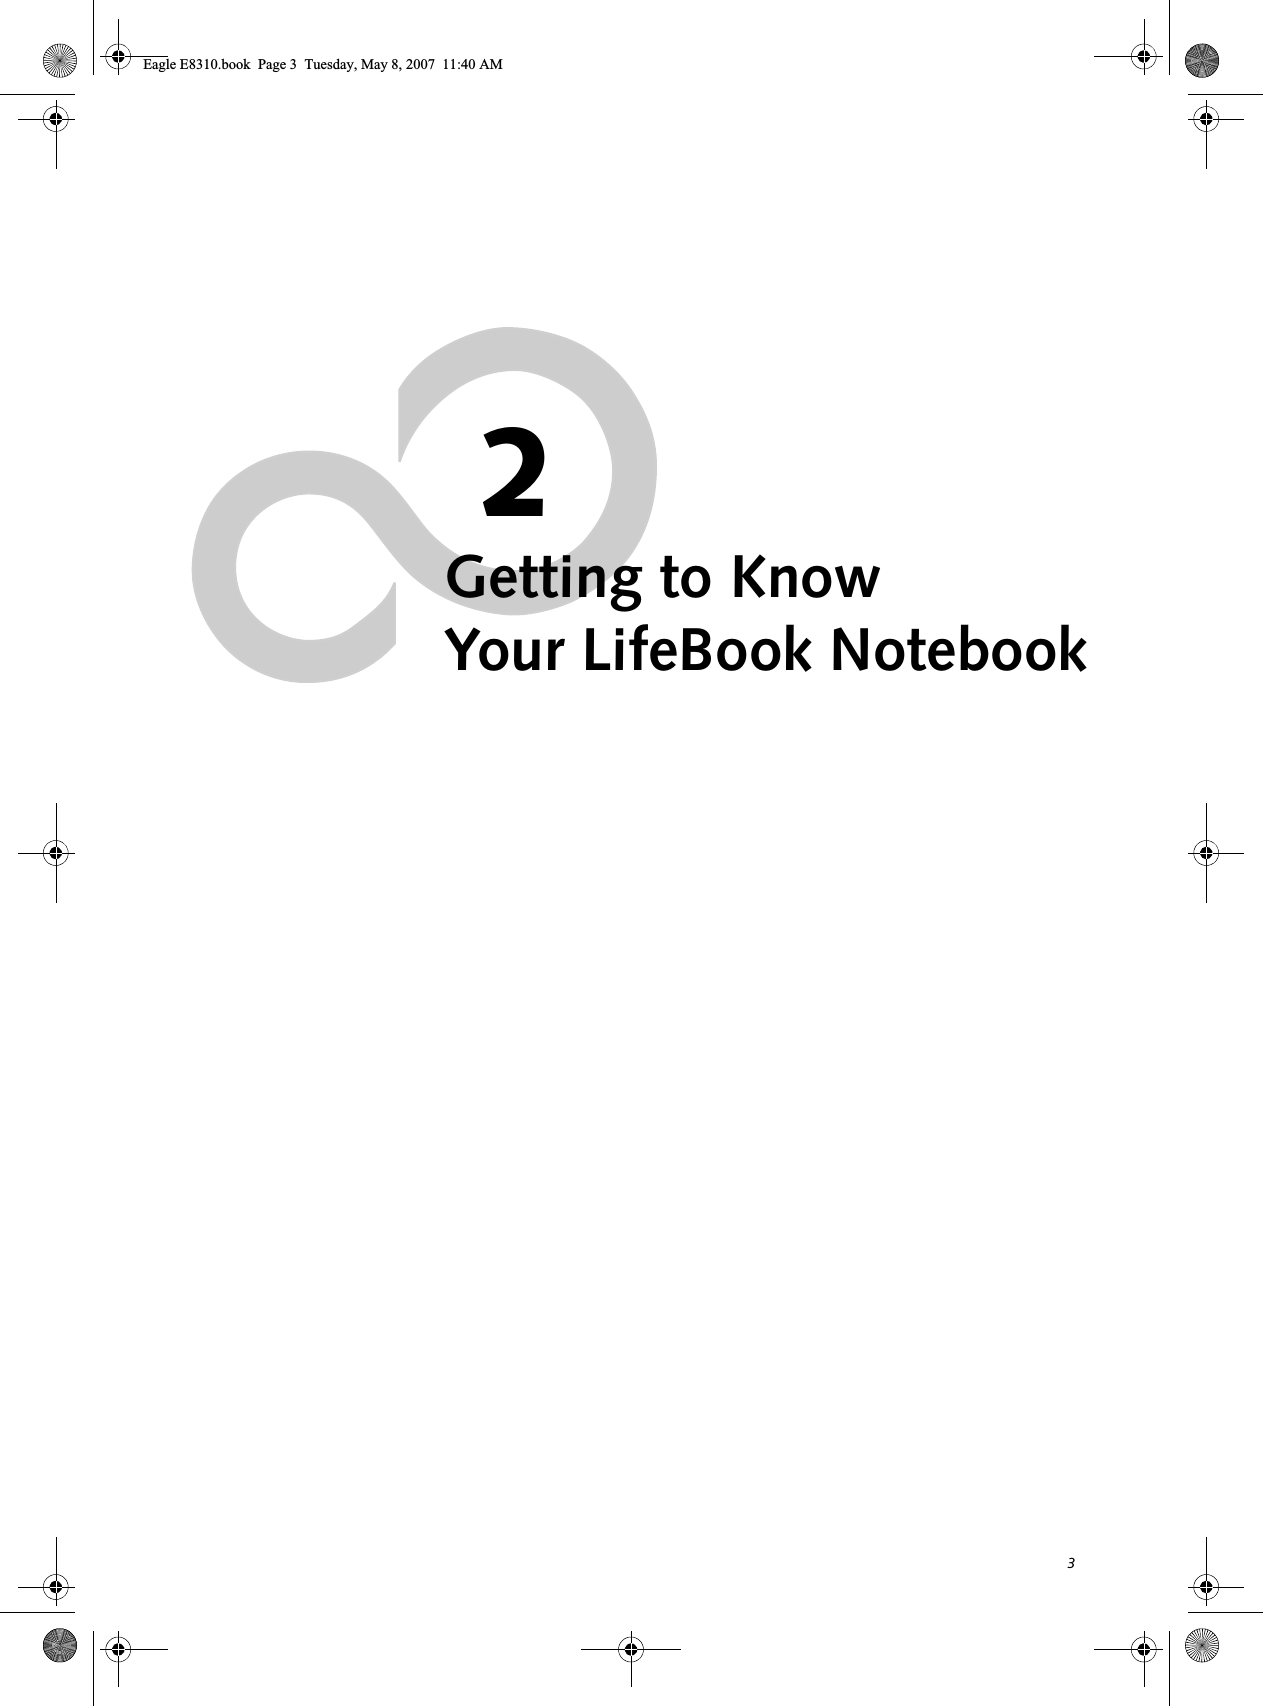 32Getting to KnowYour LifeBook NotebookEagle E8310.book  Page 3  Tuesday, May 8, 2007  11:40 AM